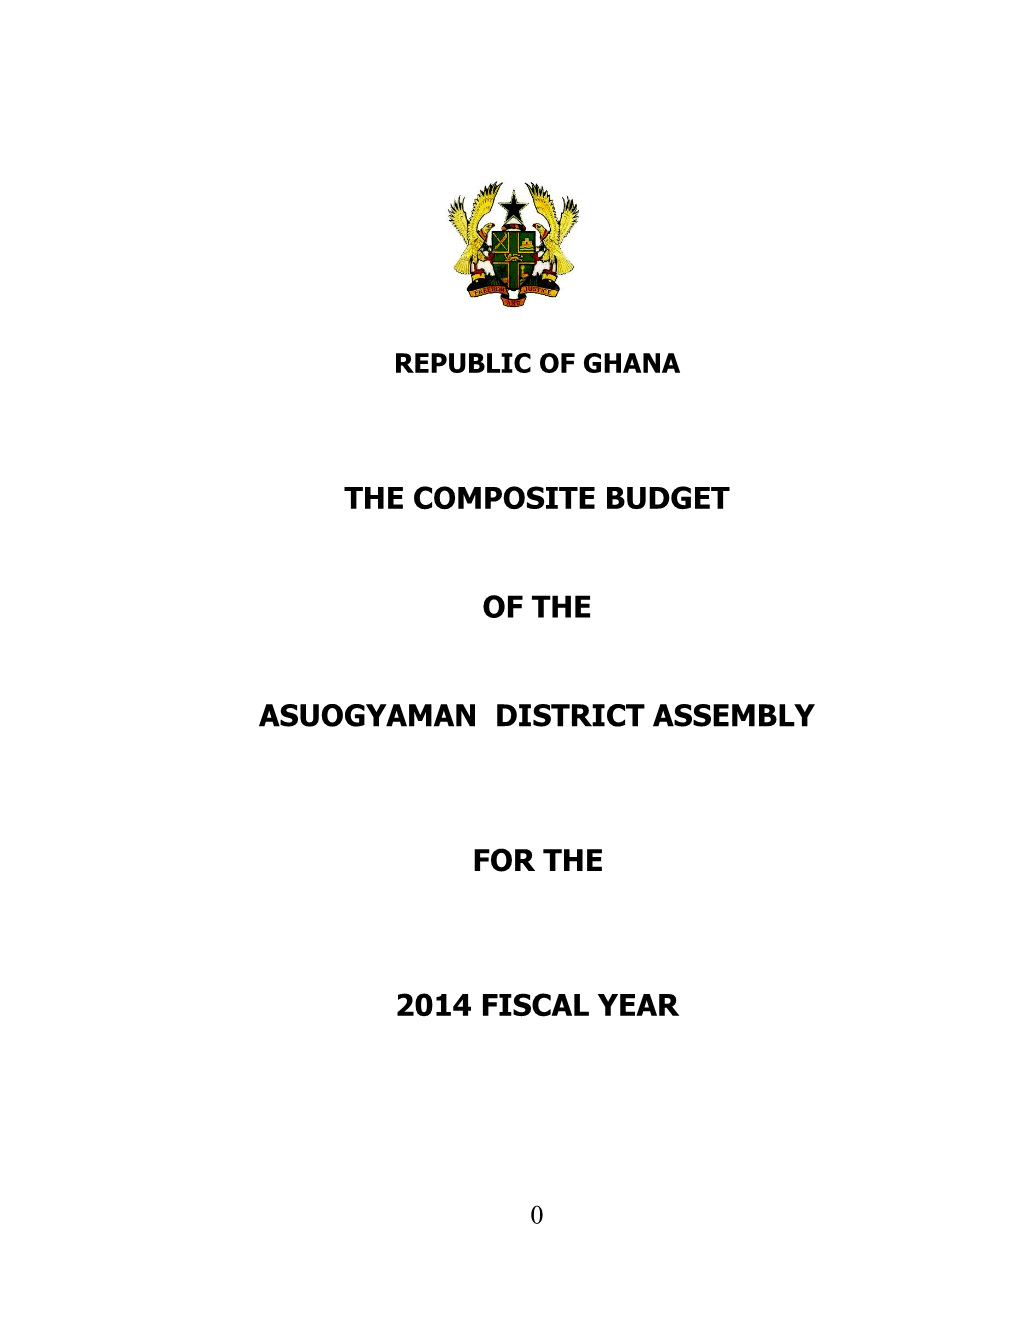 The Composite Budget of the Asuogyaman District Assembly For